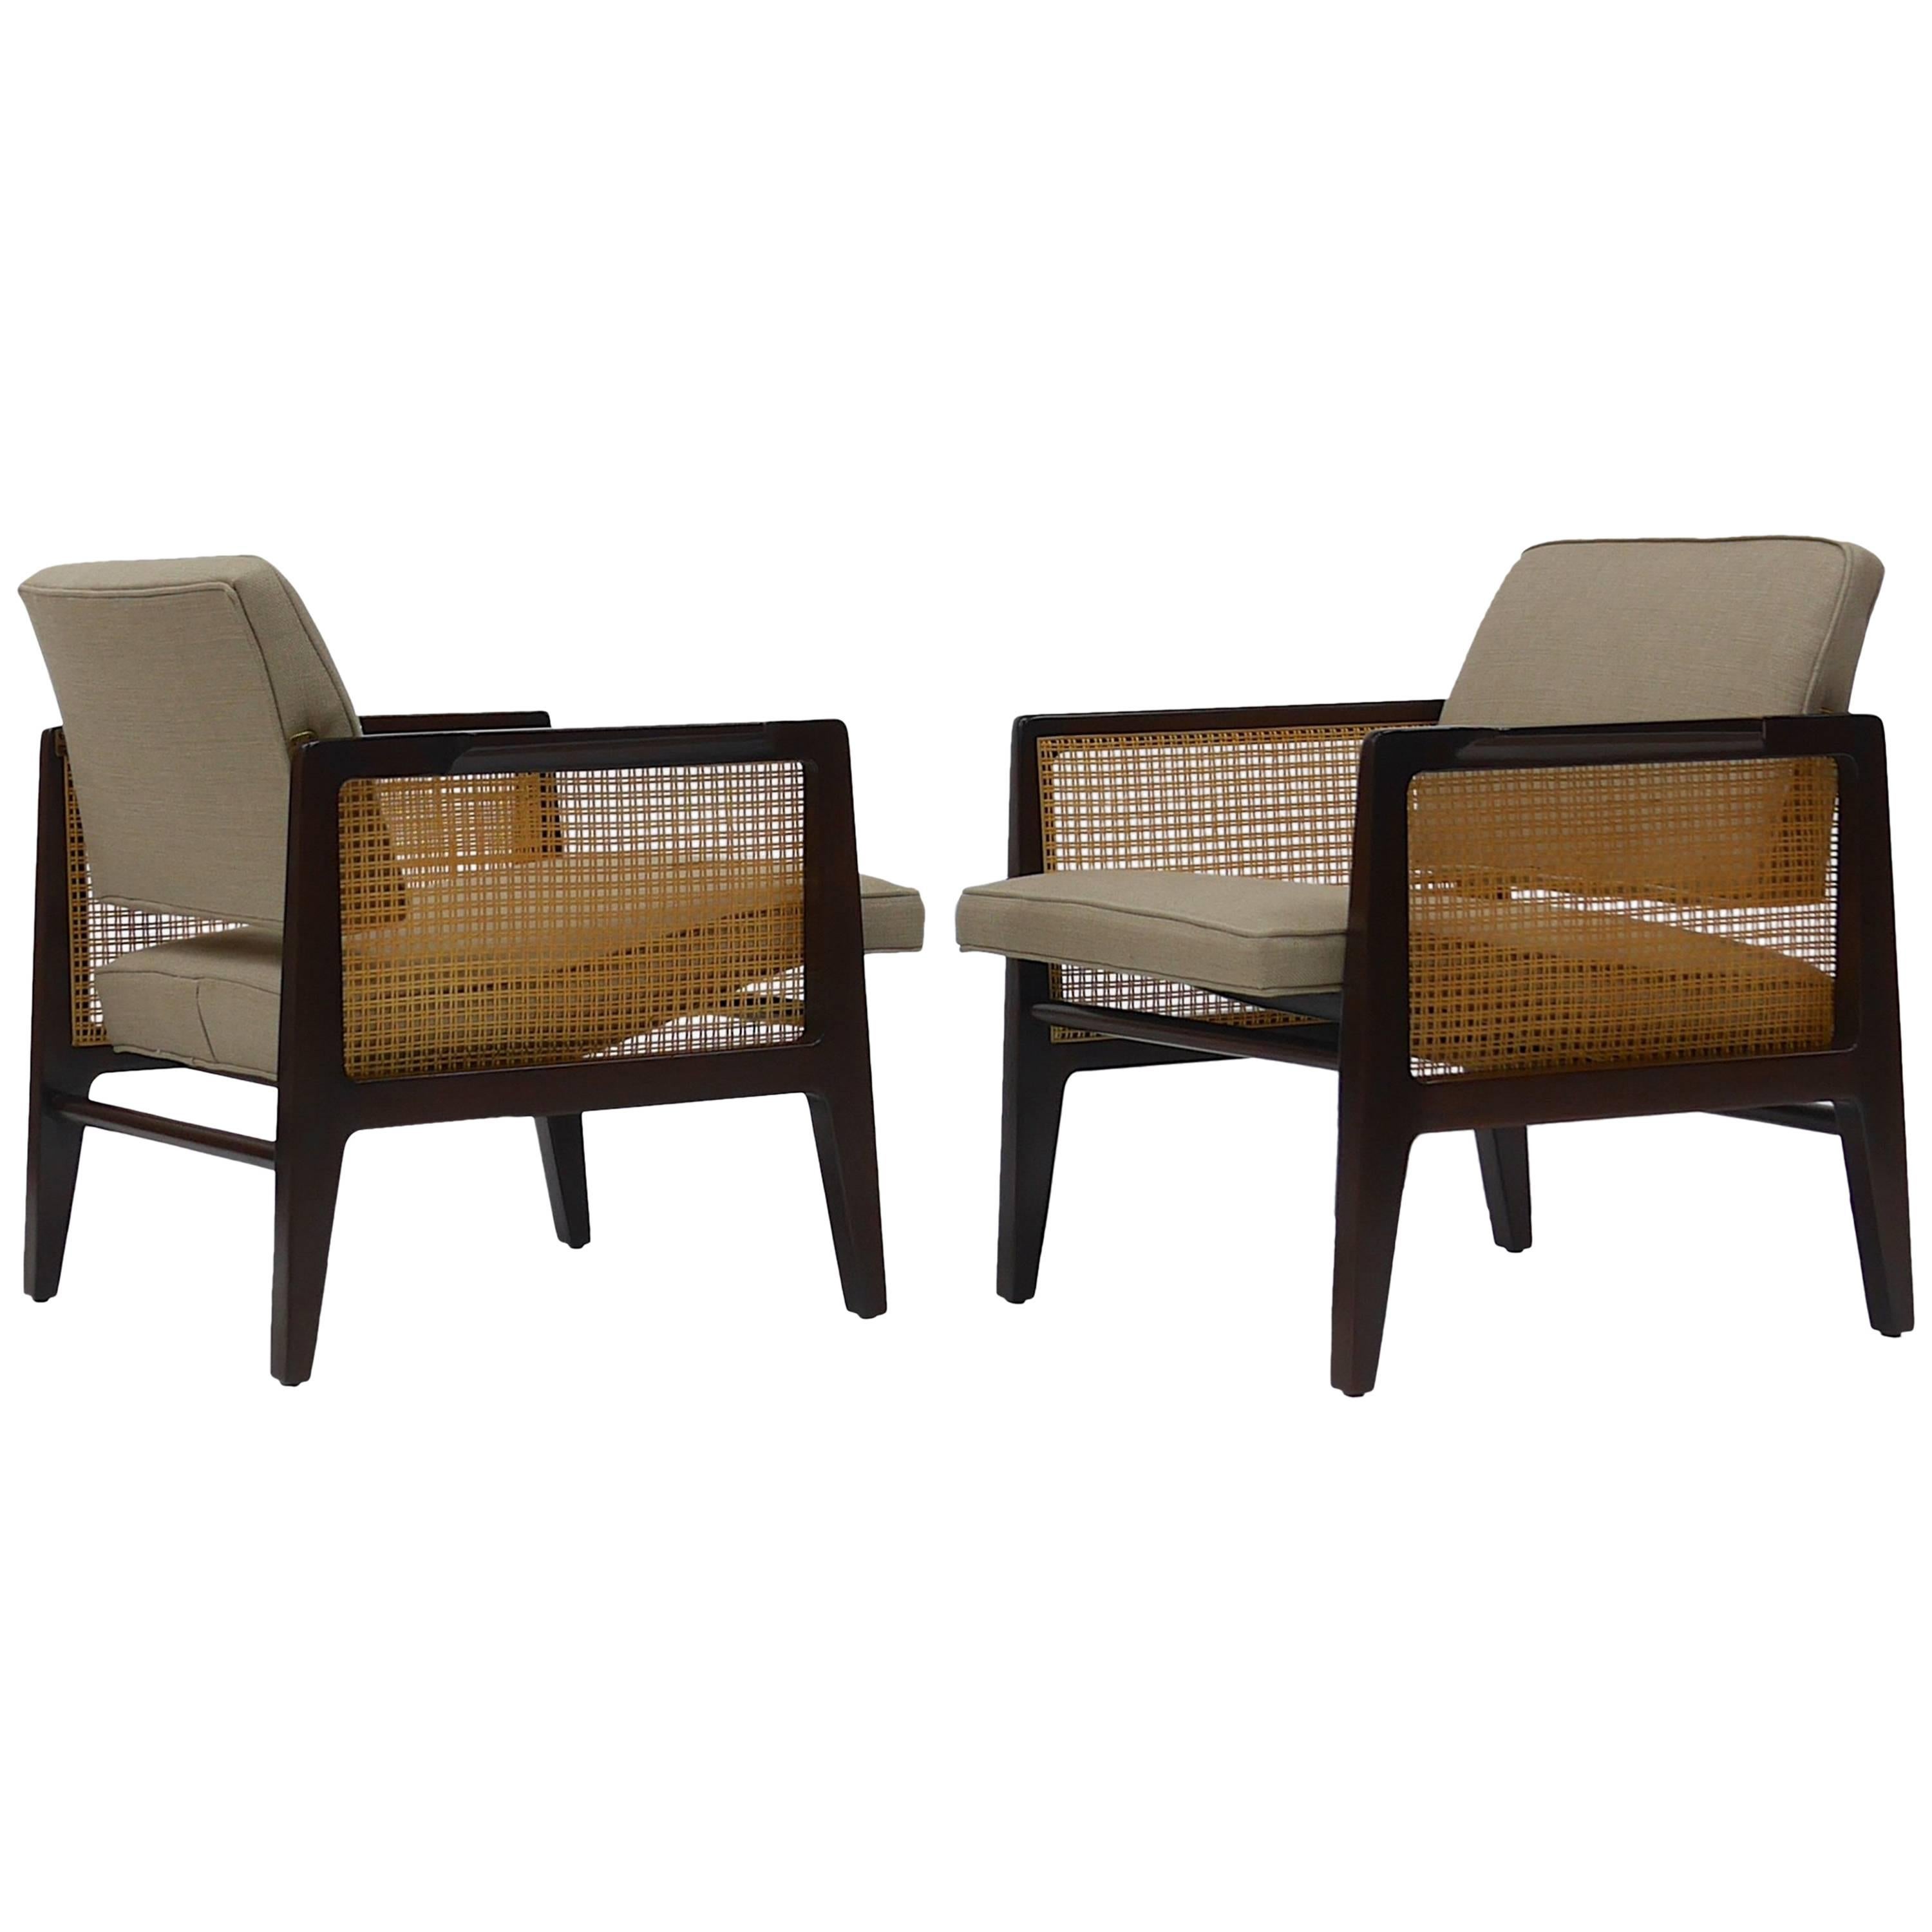 Pair of Edward Wormley for Dunbar Cane Sided Lounge Chairs For Sale